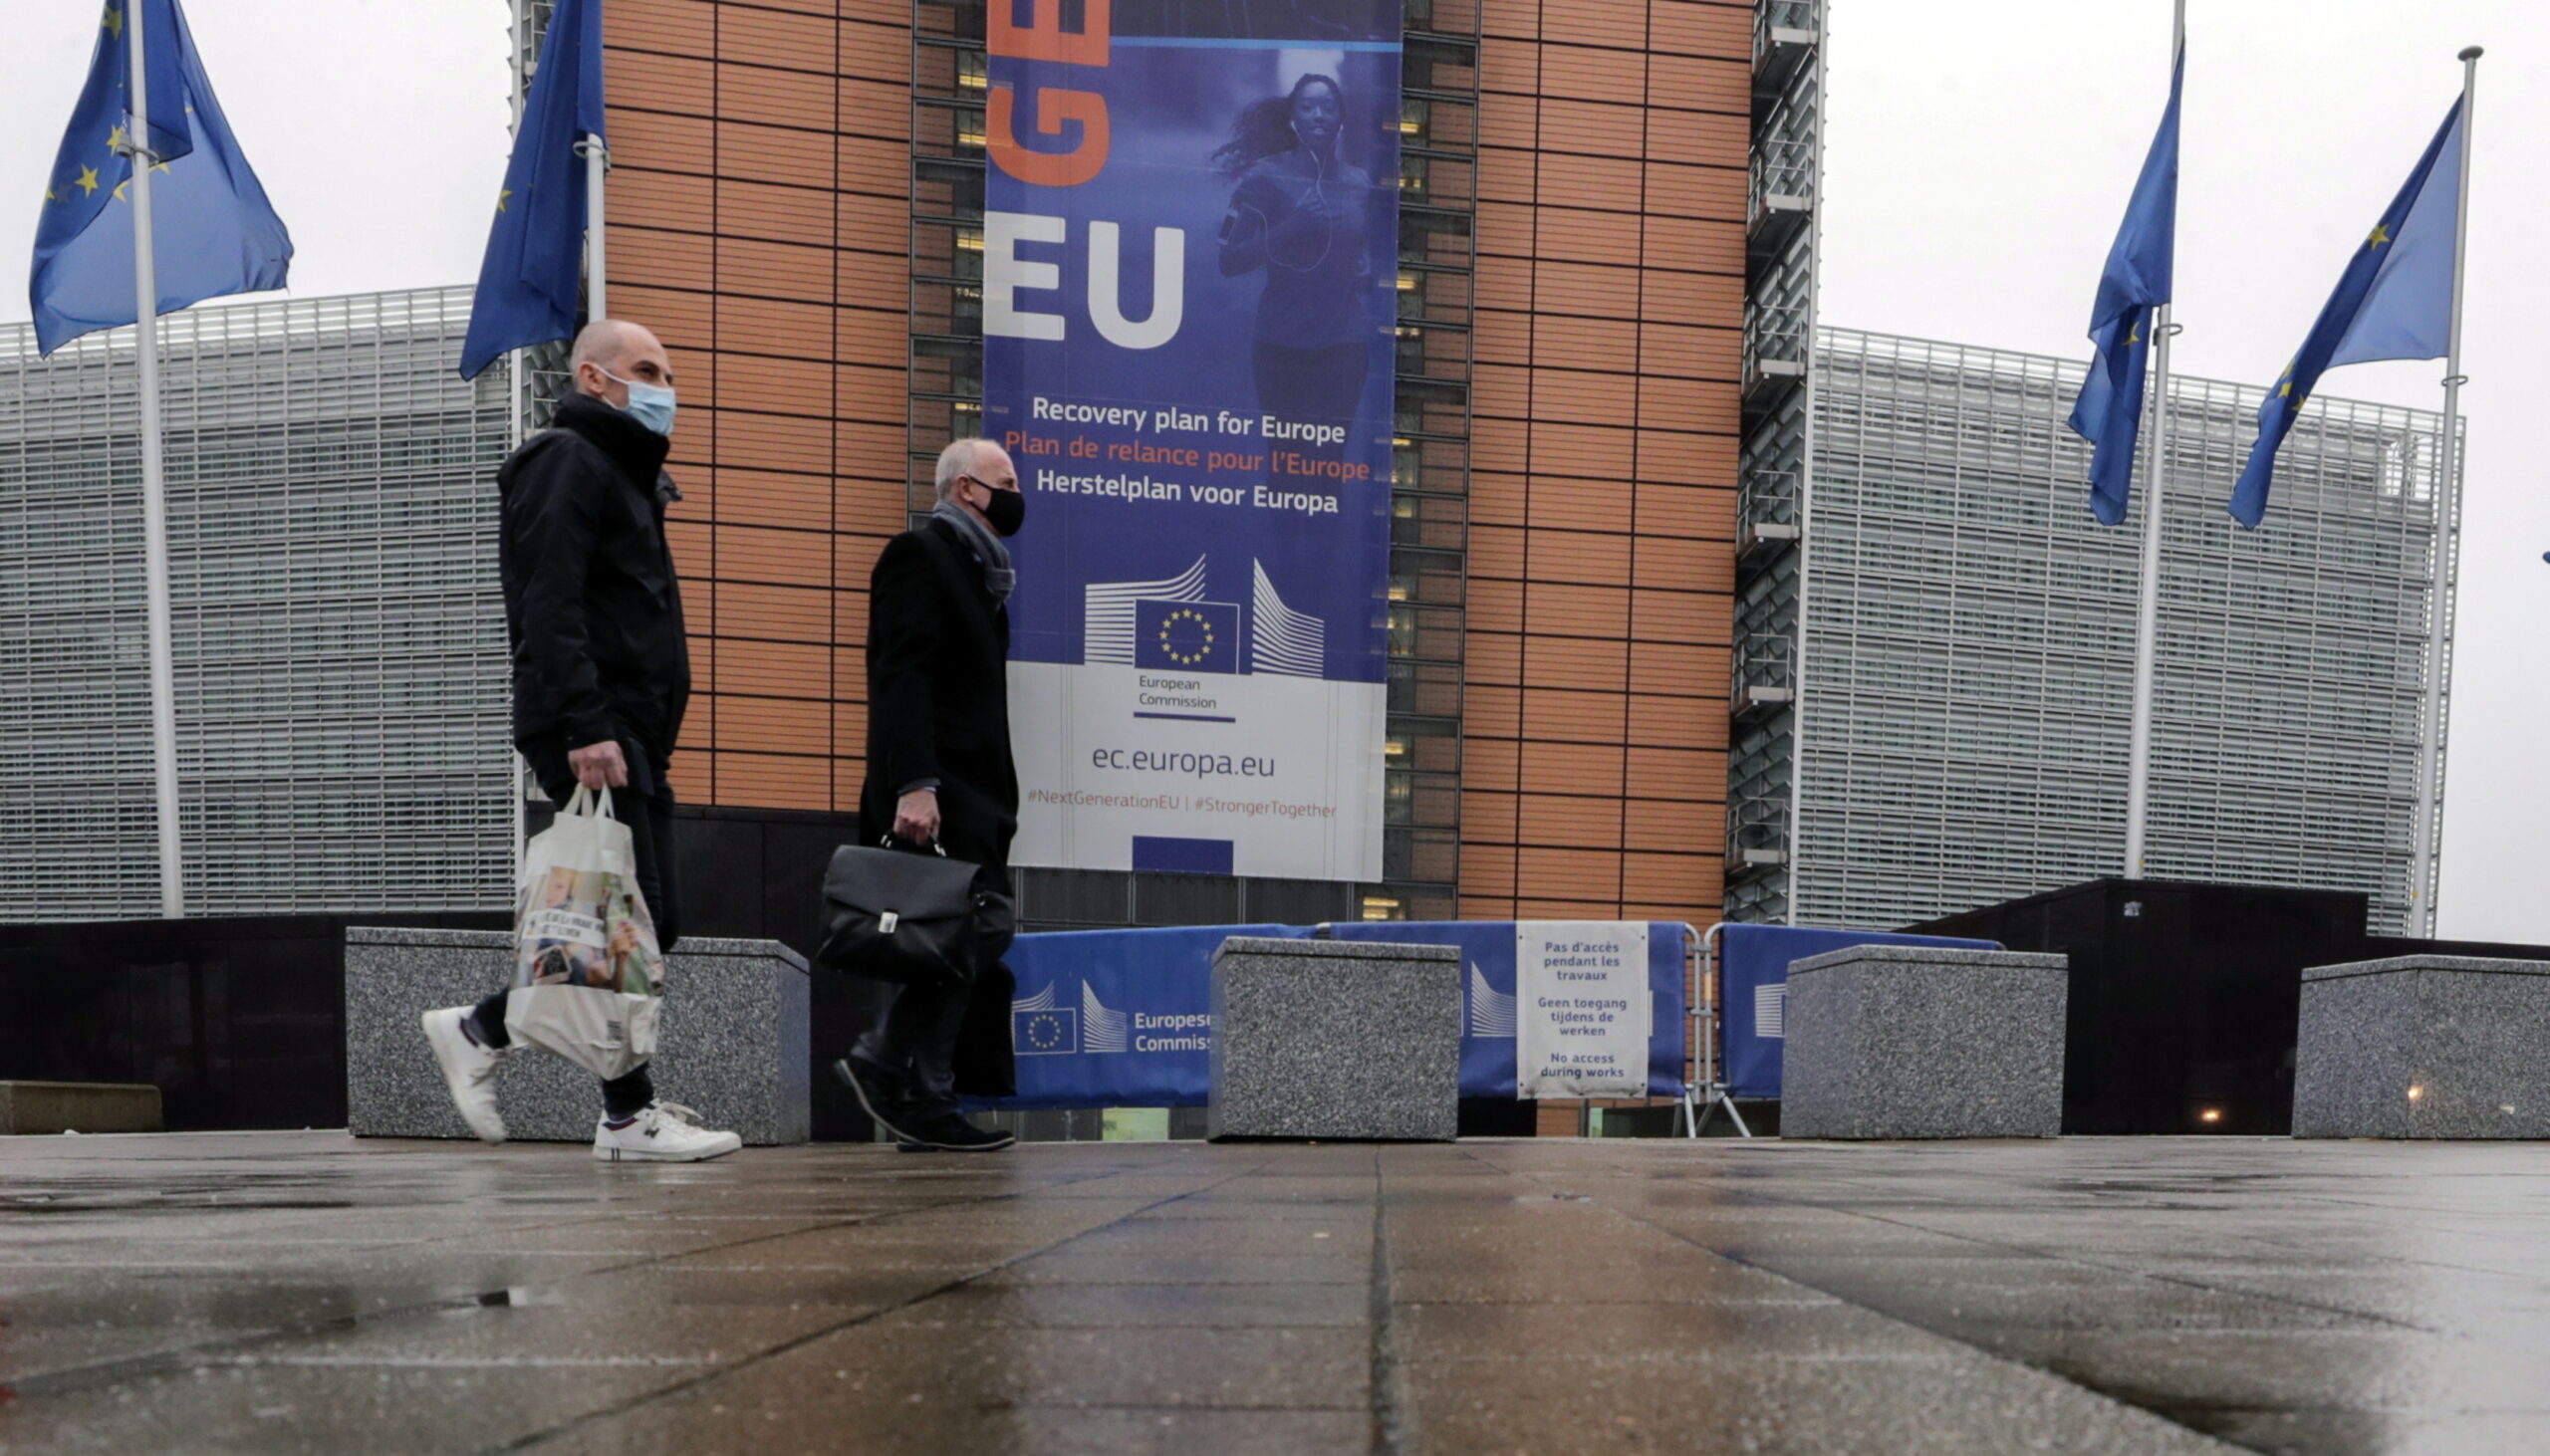 epa08968608 Two persons walk in front of the European Commission headquarters in Brussels, Belgium, 27 January 2021, ahead of a press conference by European Commissioner in charge of Health Stella Kyriakides about deliveries and export transparency scheme for coronavirus disease (COVID-19) vaccines.  EPA/OLIVIER HOSLET